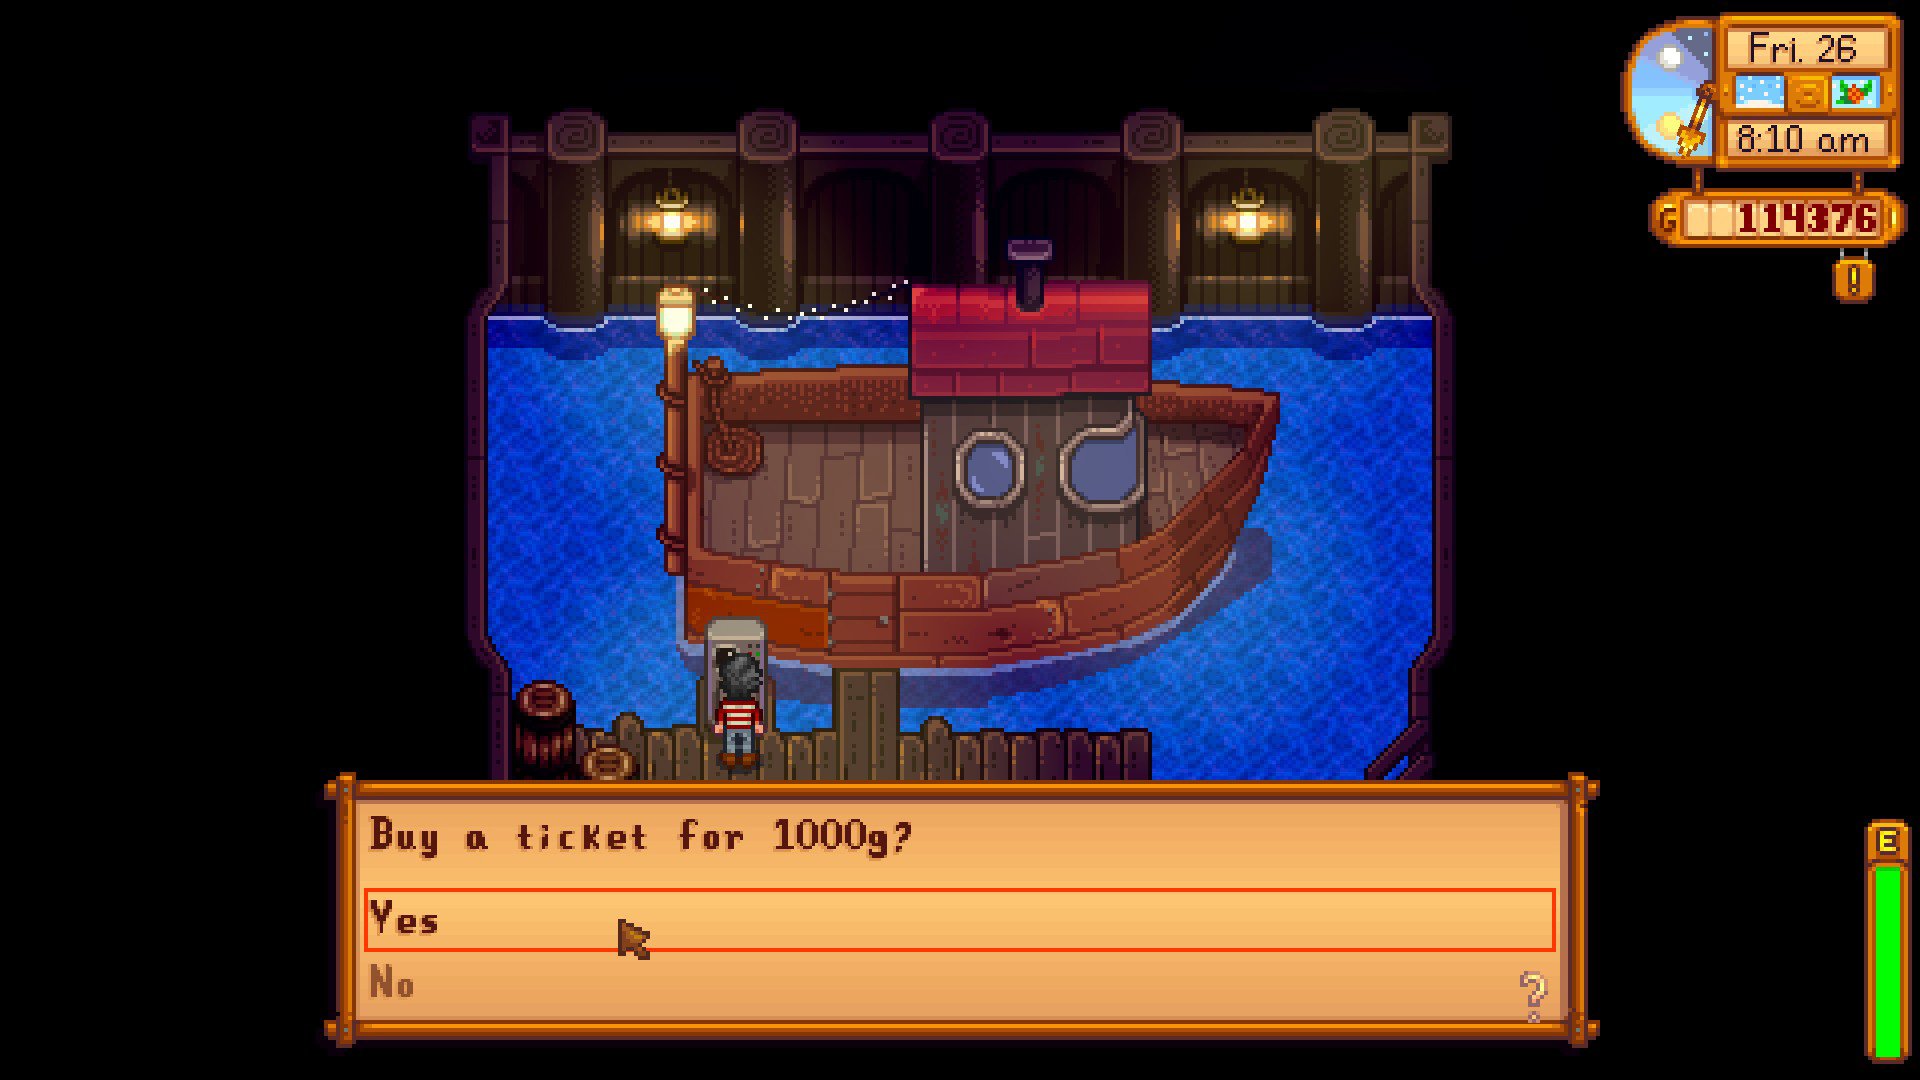 Steps to Repair Willy’s Boat and Access Ginger Island in Stardew Valley